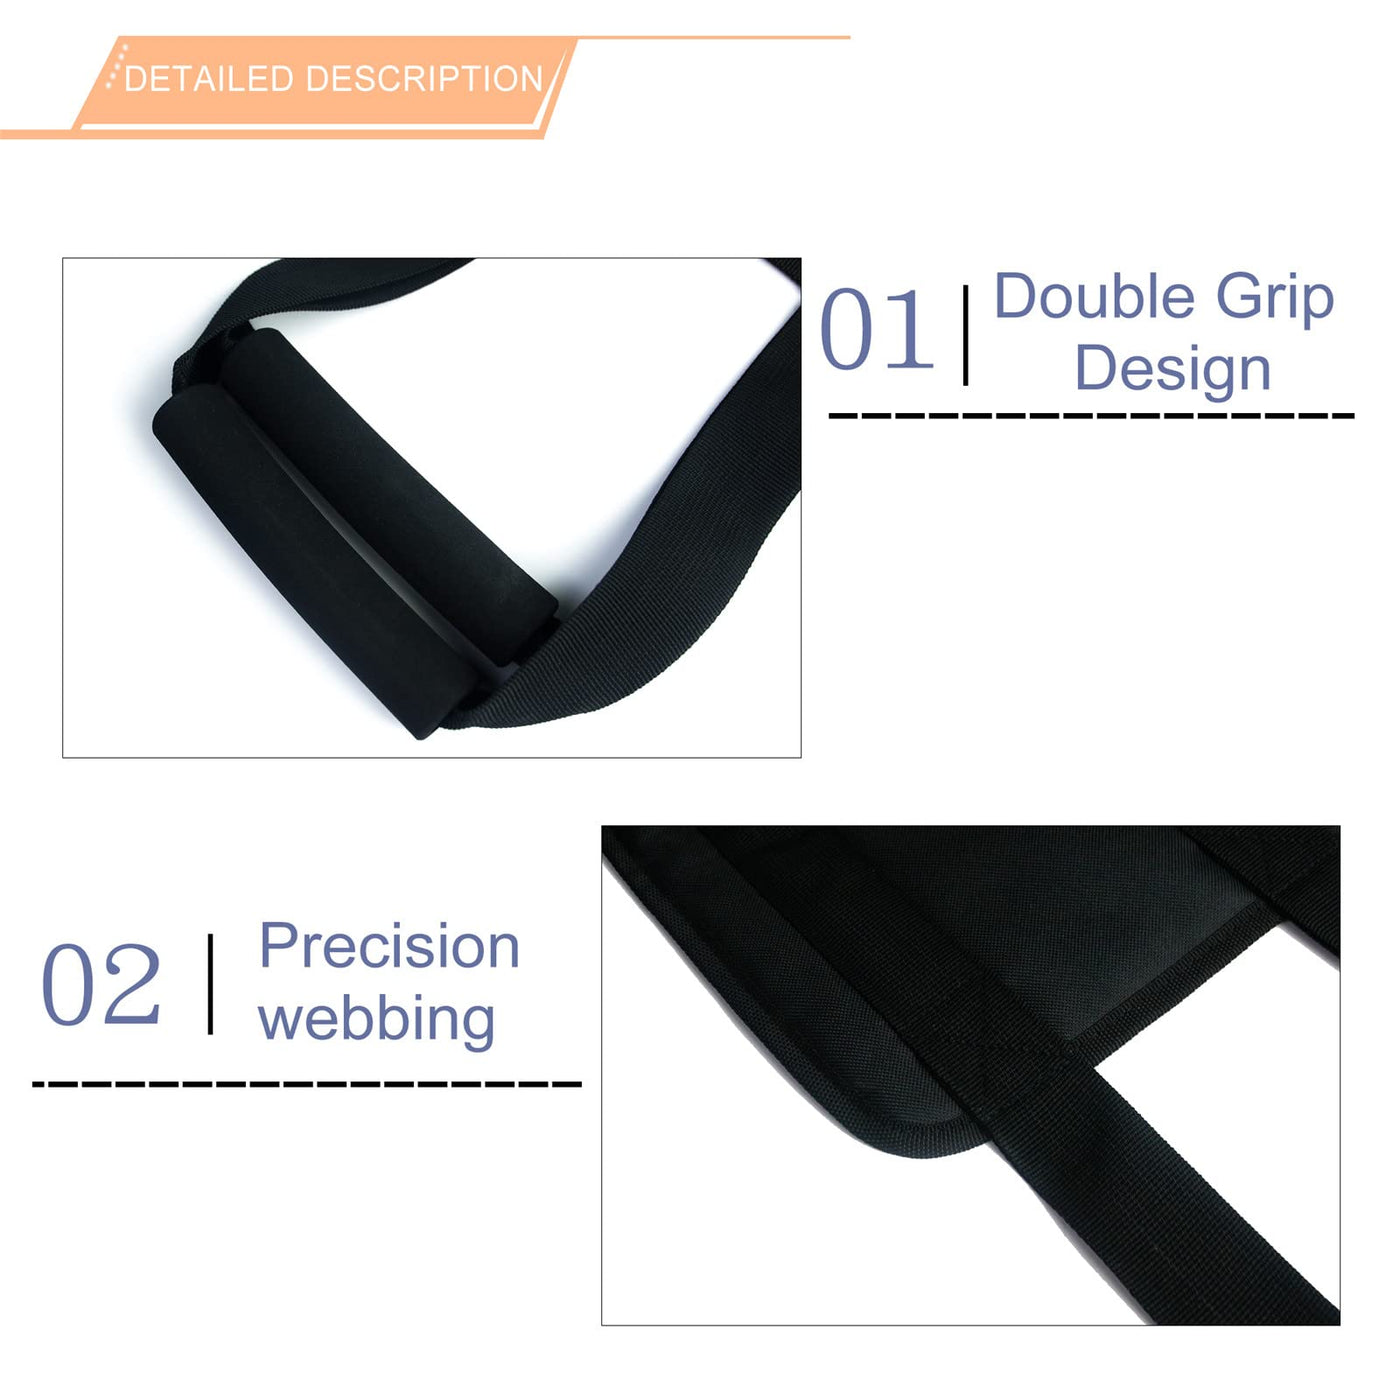 31.5 Inch Padded Bed Transfer Nursing Sling for Patient, Elderly Safety  Lifting